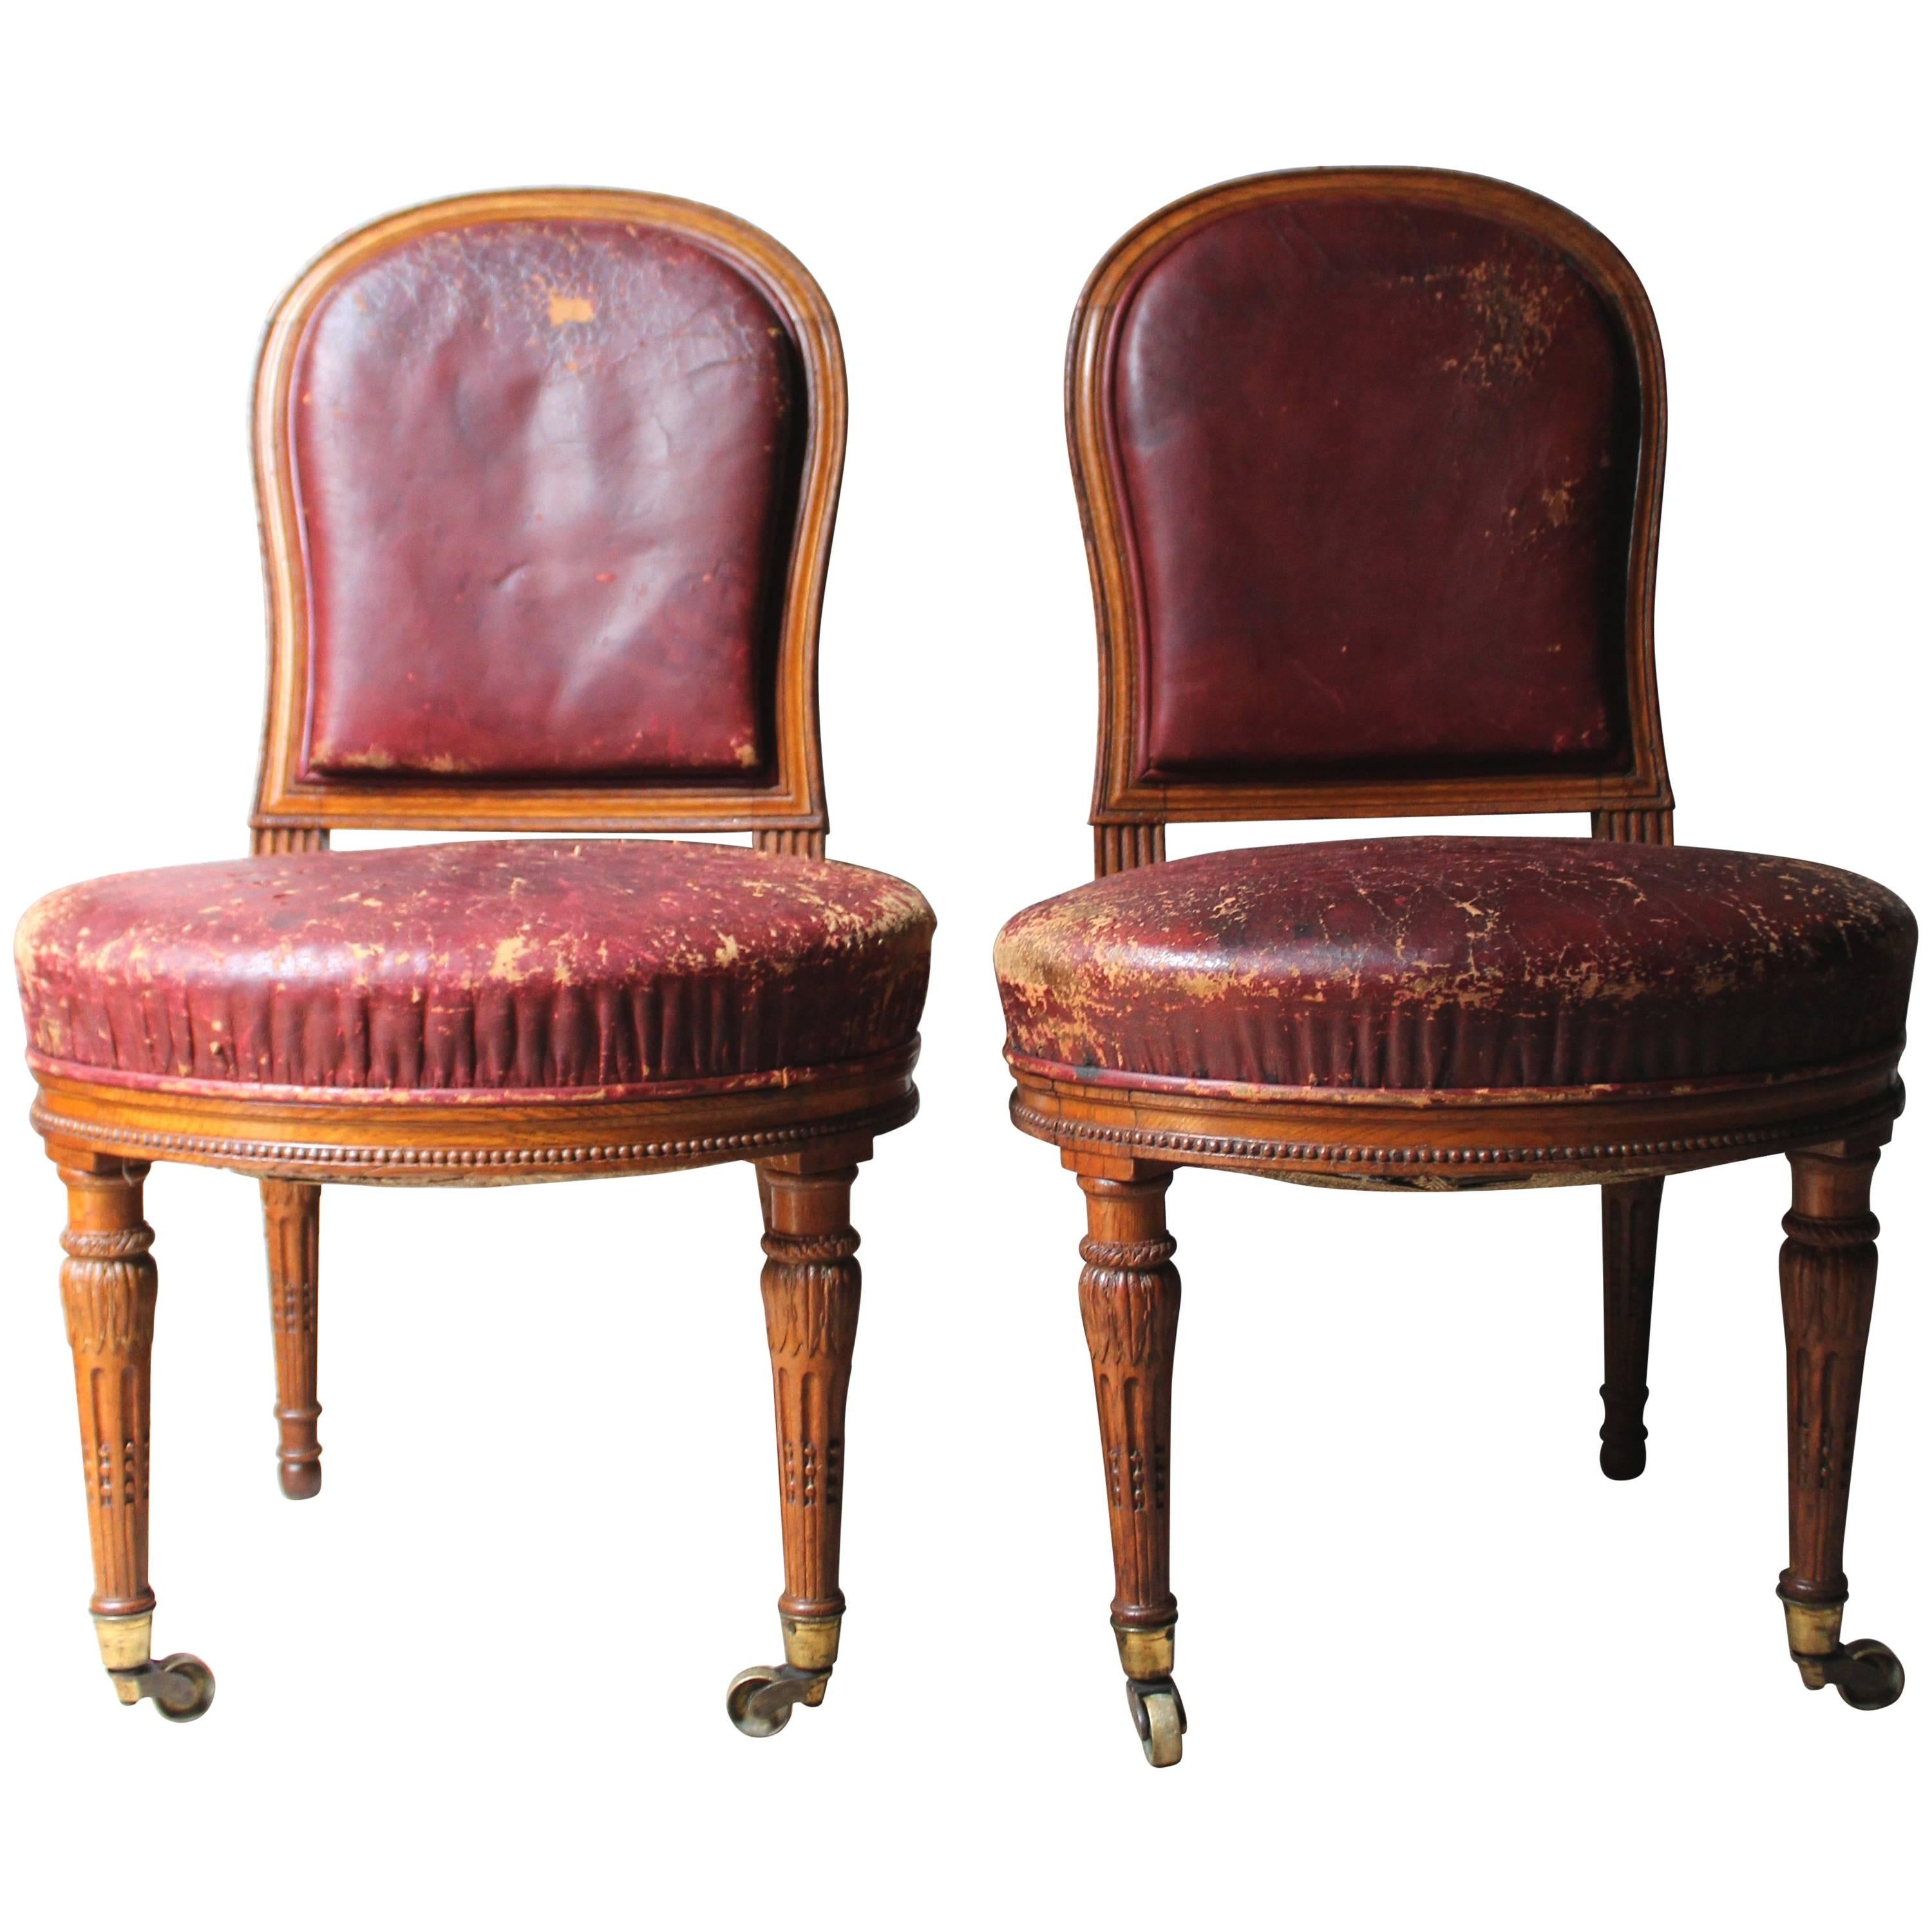 Pair of Early Victorian Golden Oak and Leather Upholstered Chairs, circa 1840